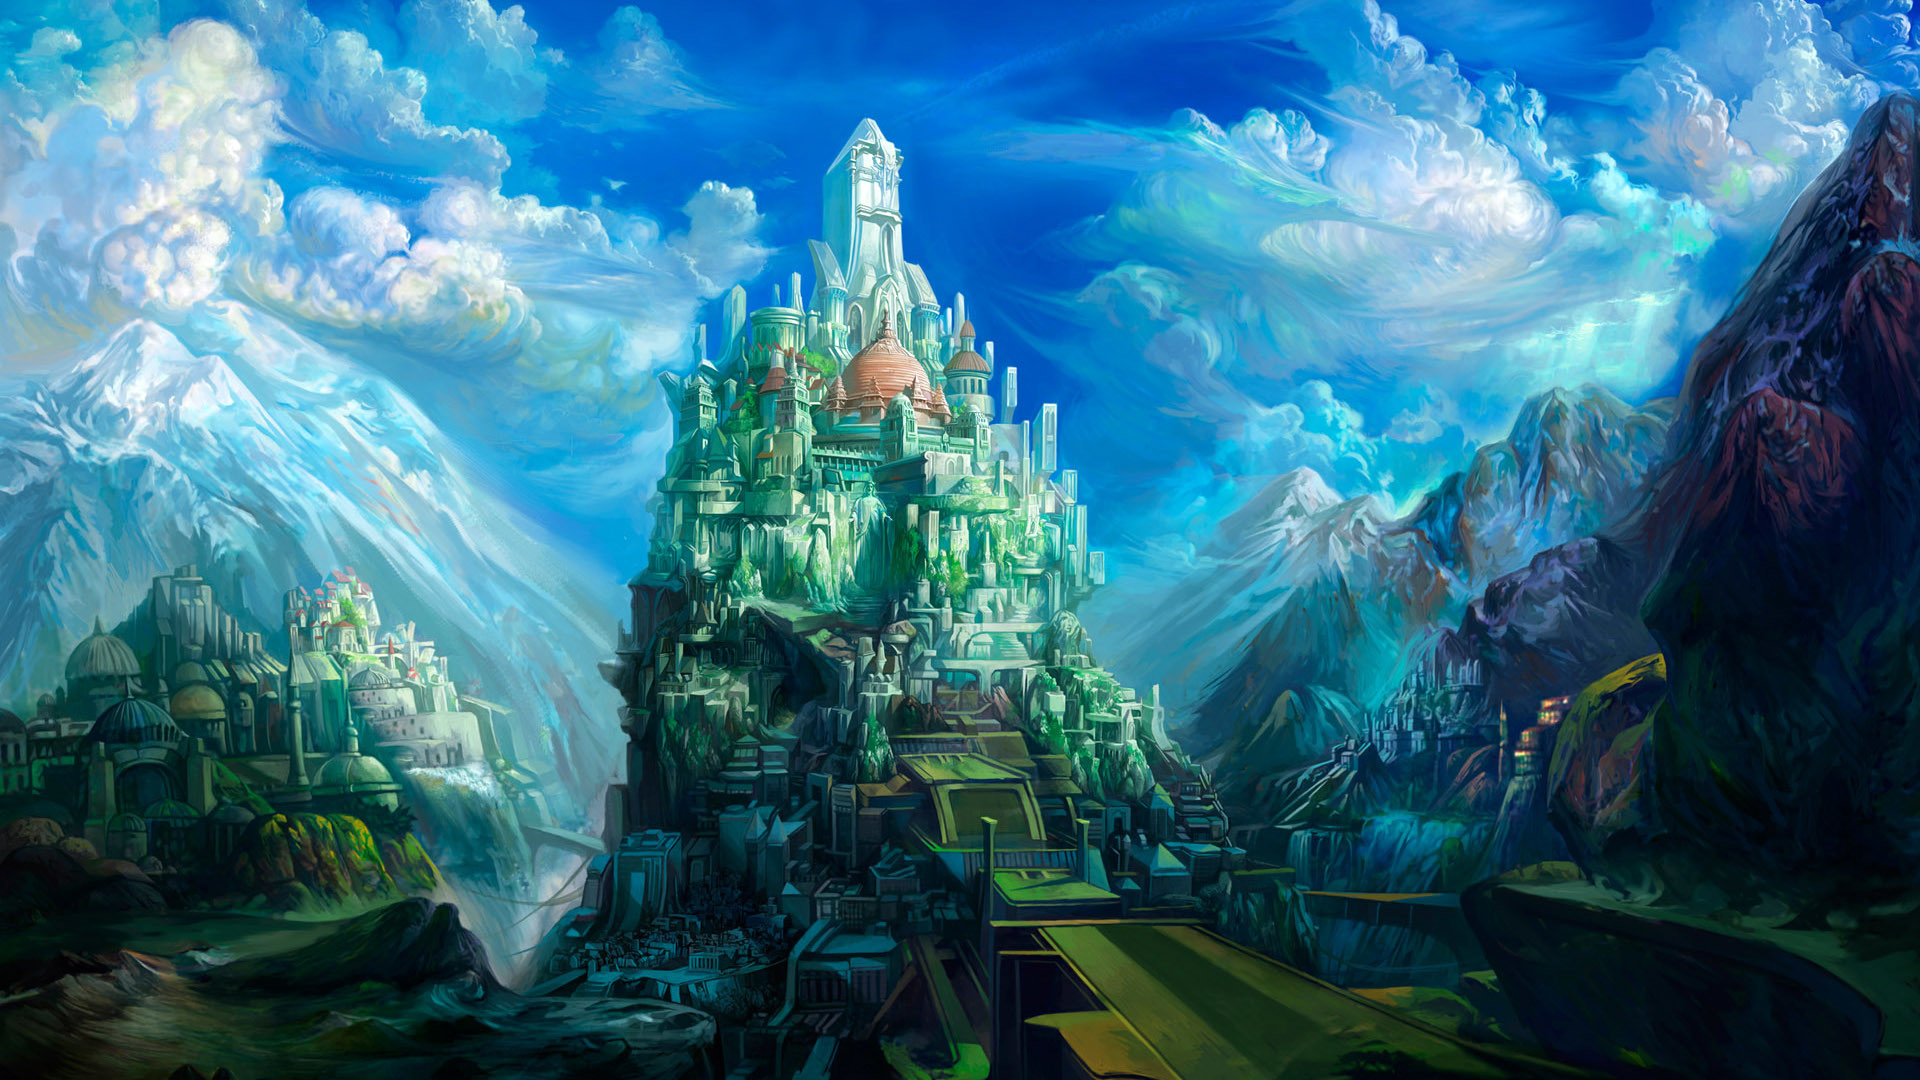 Mobile Compatible 3d Hd Wallpapers, Demarcus Buitron - Ice Castle - HD Wallpaper 